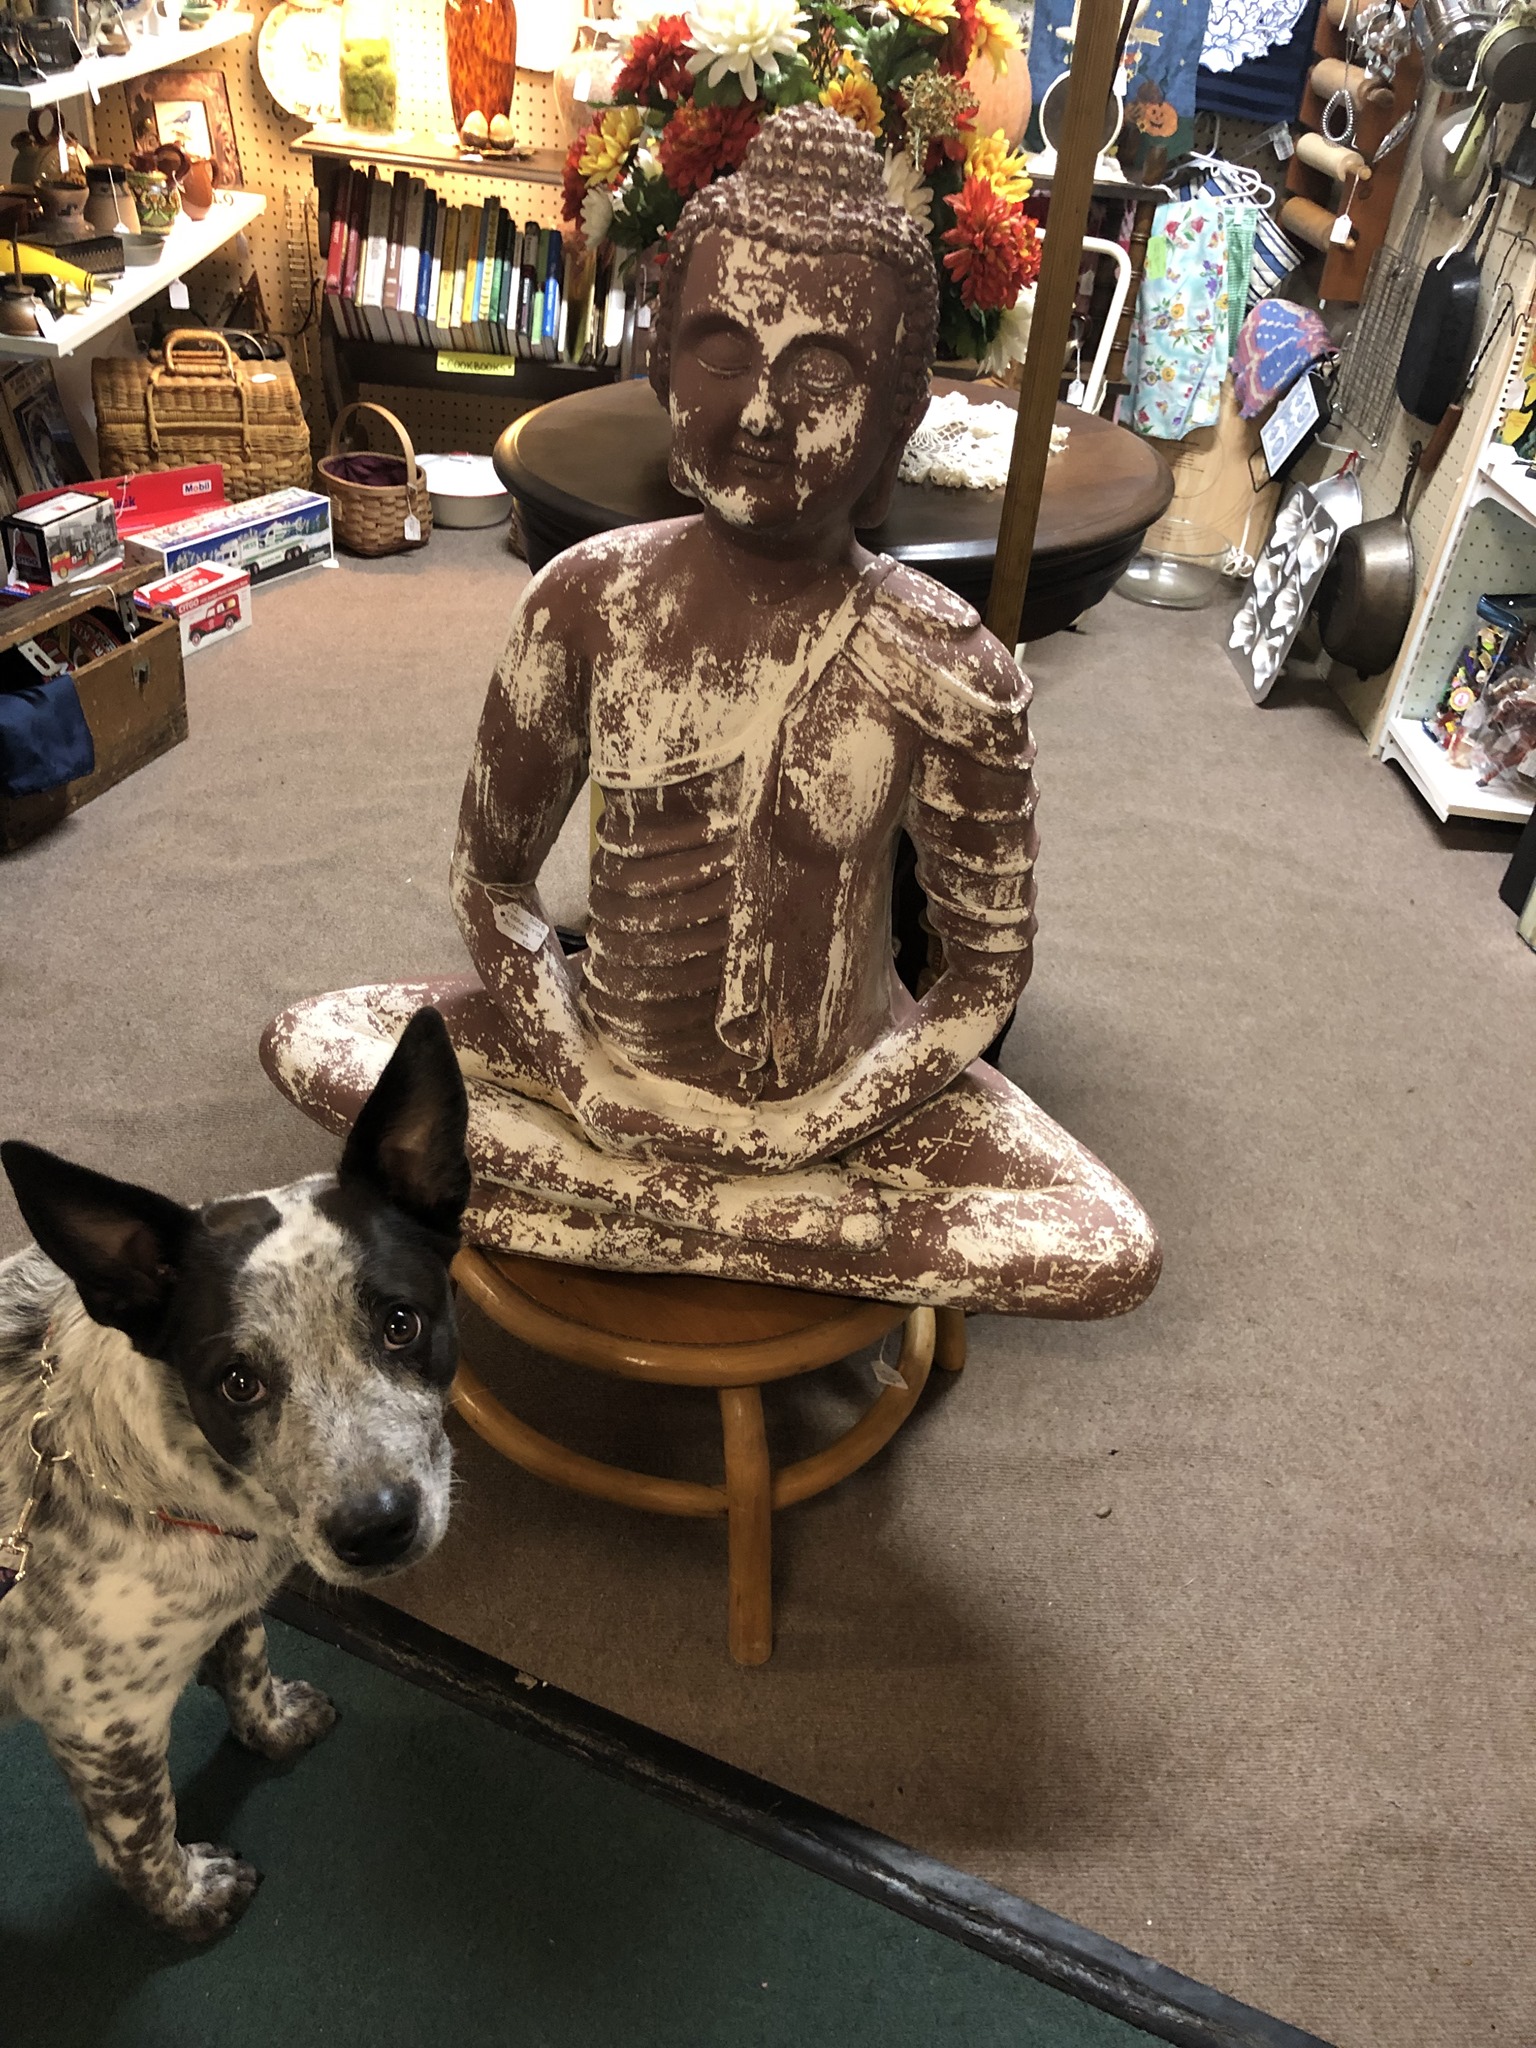 Scranberry Coop Snapshots - Jeff was tired, but Tosh jumped in to help! - Scranberry Coop - Vintage Store - Antiques, Collectibles, & More